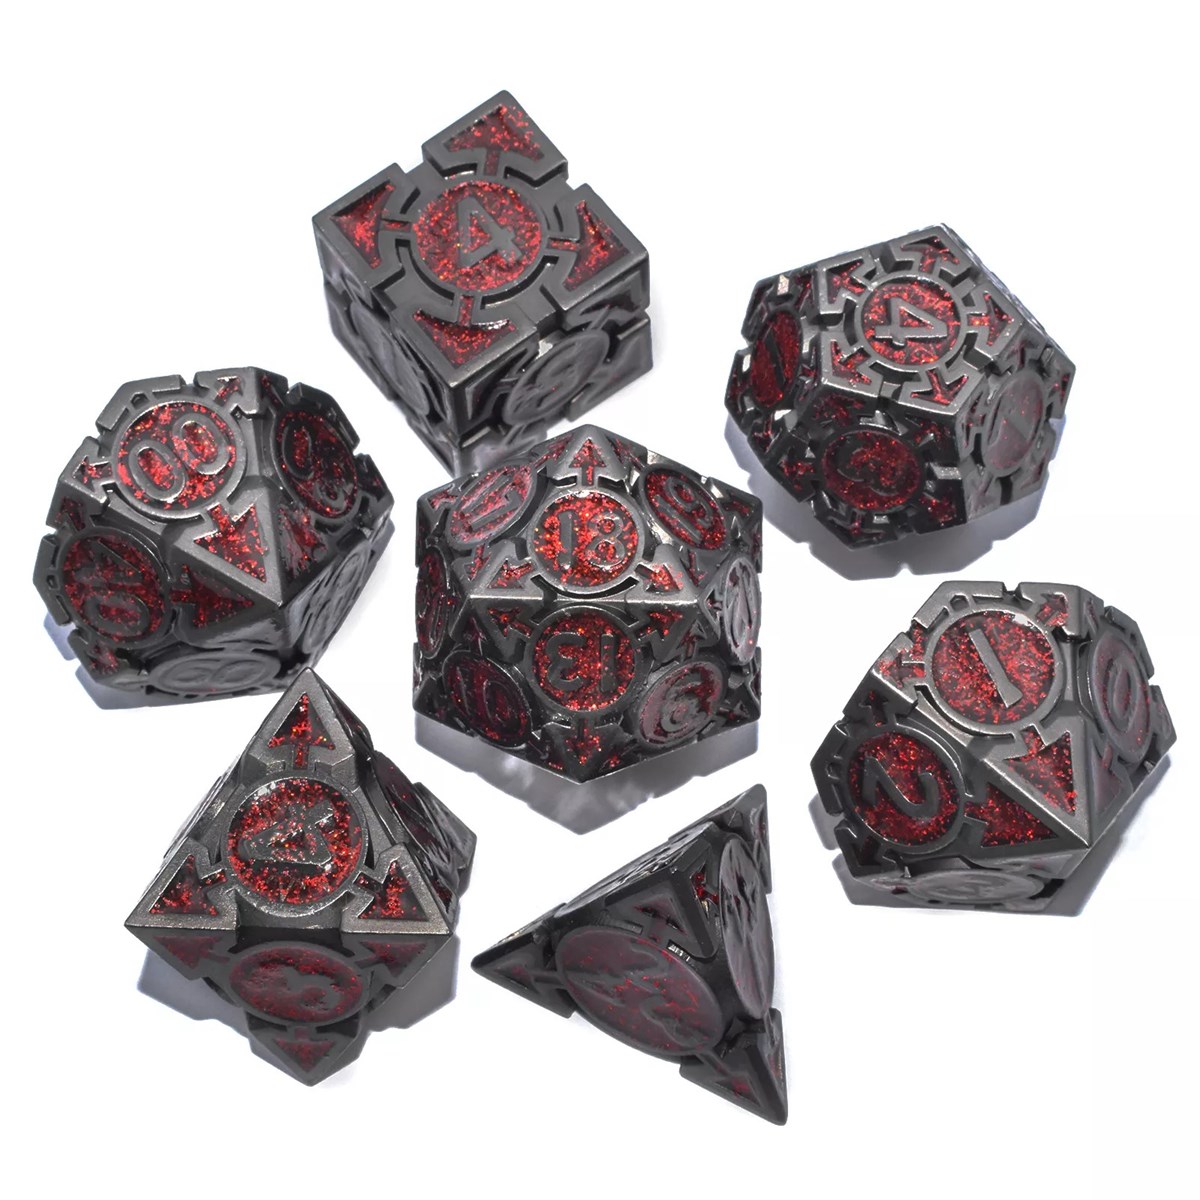 New Style 7 Pcs Galaxy Metal D&D Dice Polyhedral Metal Dice Set for Role Playing Game MTG Pathfinder